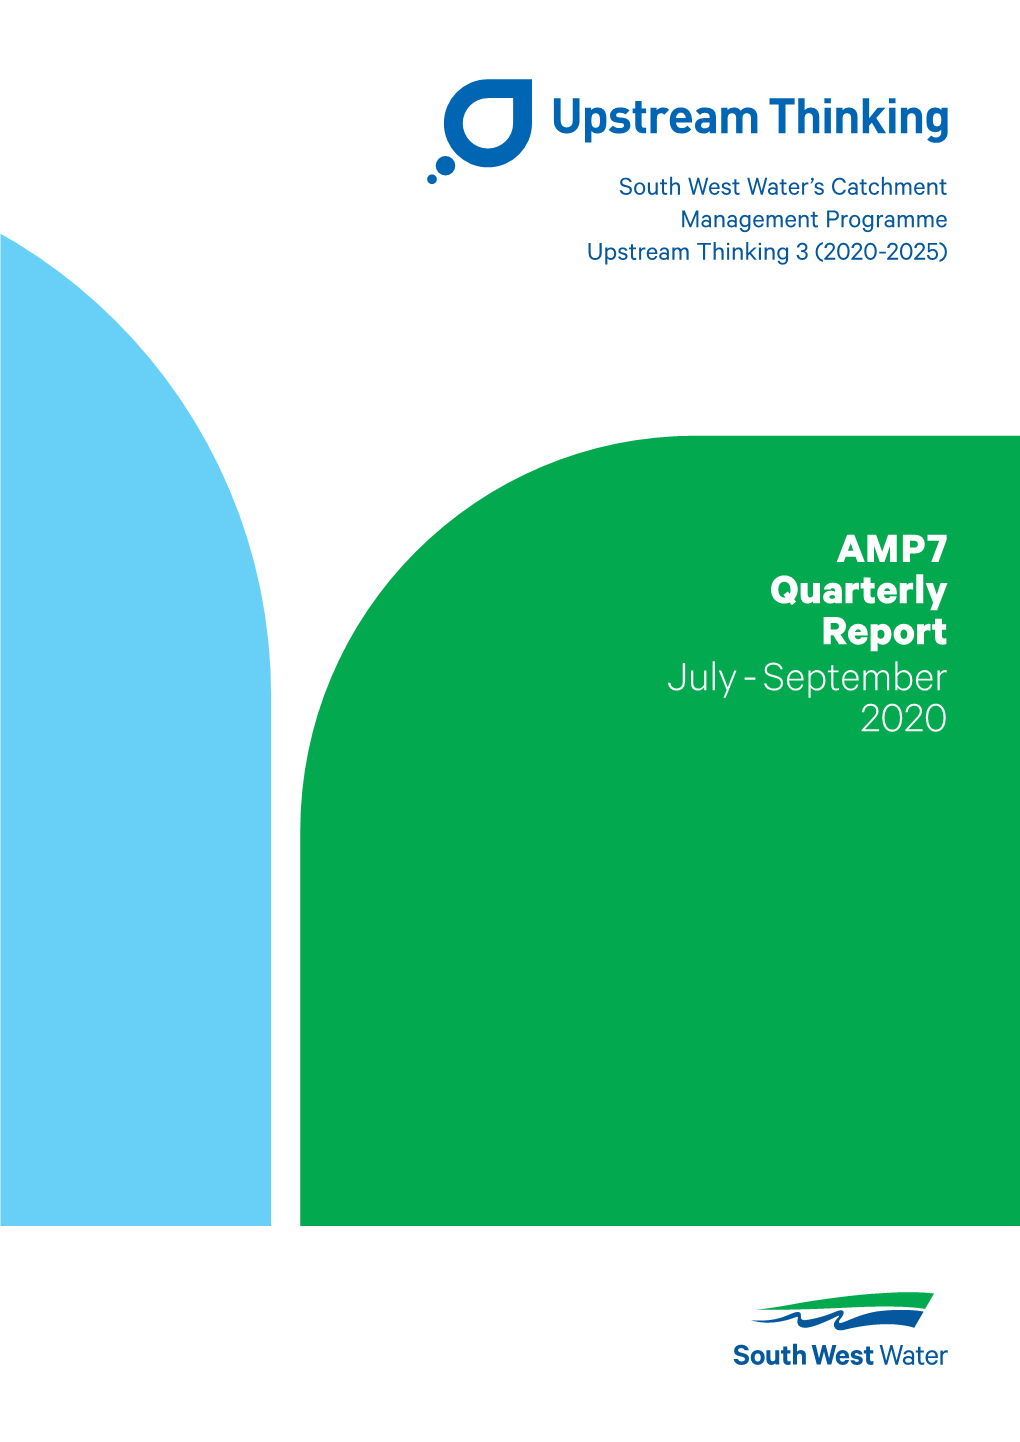 AMP7 Quarterly Report July - September 2020 This Is the Upstream Thinking Quarterly Update for UST Schemes Partners and Stakeholders